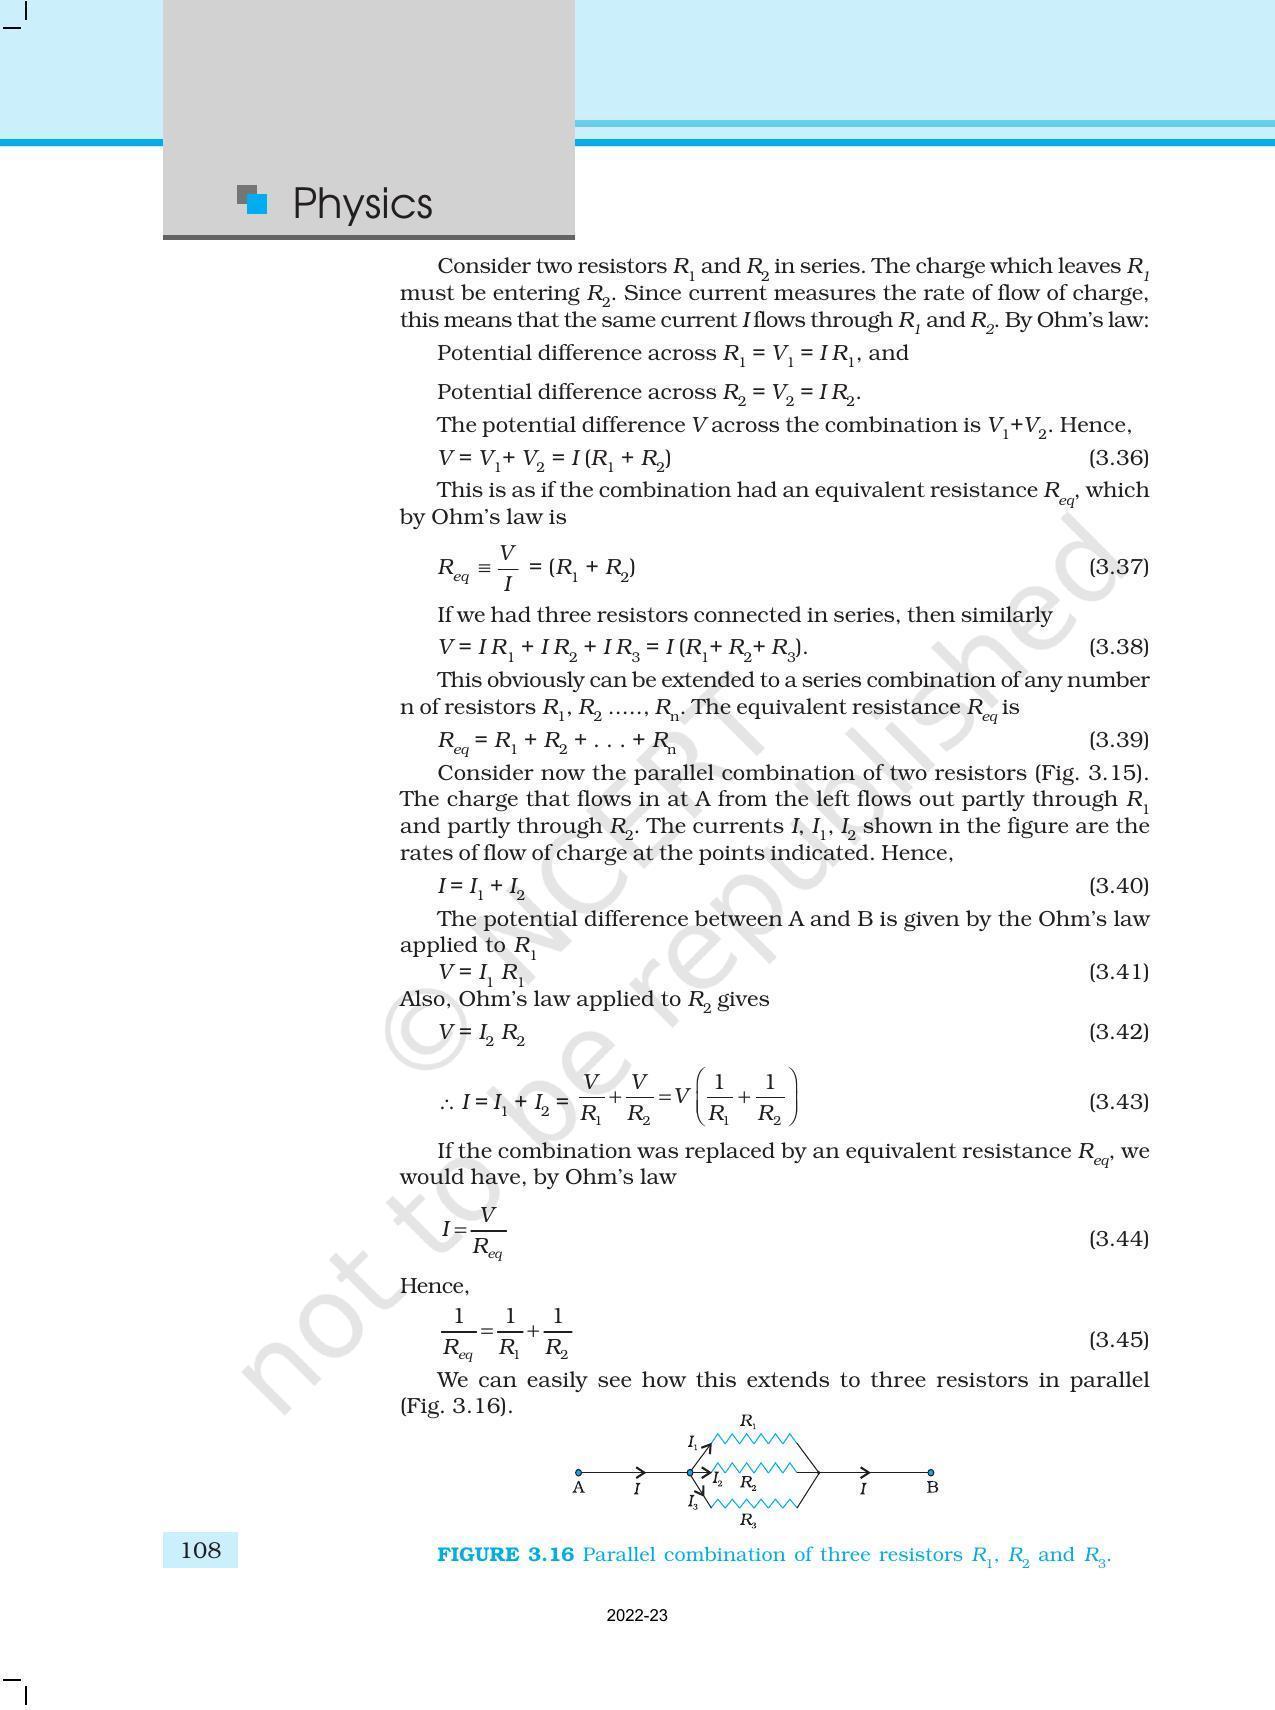 NCERT Book for Class 12 Physics Chapter 3 Current Electricity - Page 16